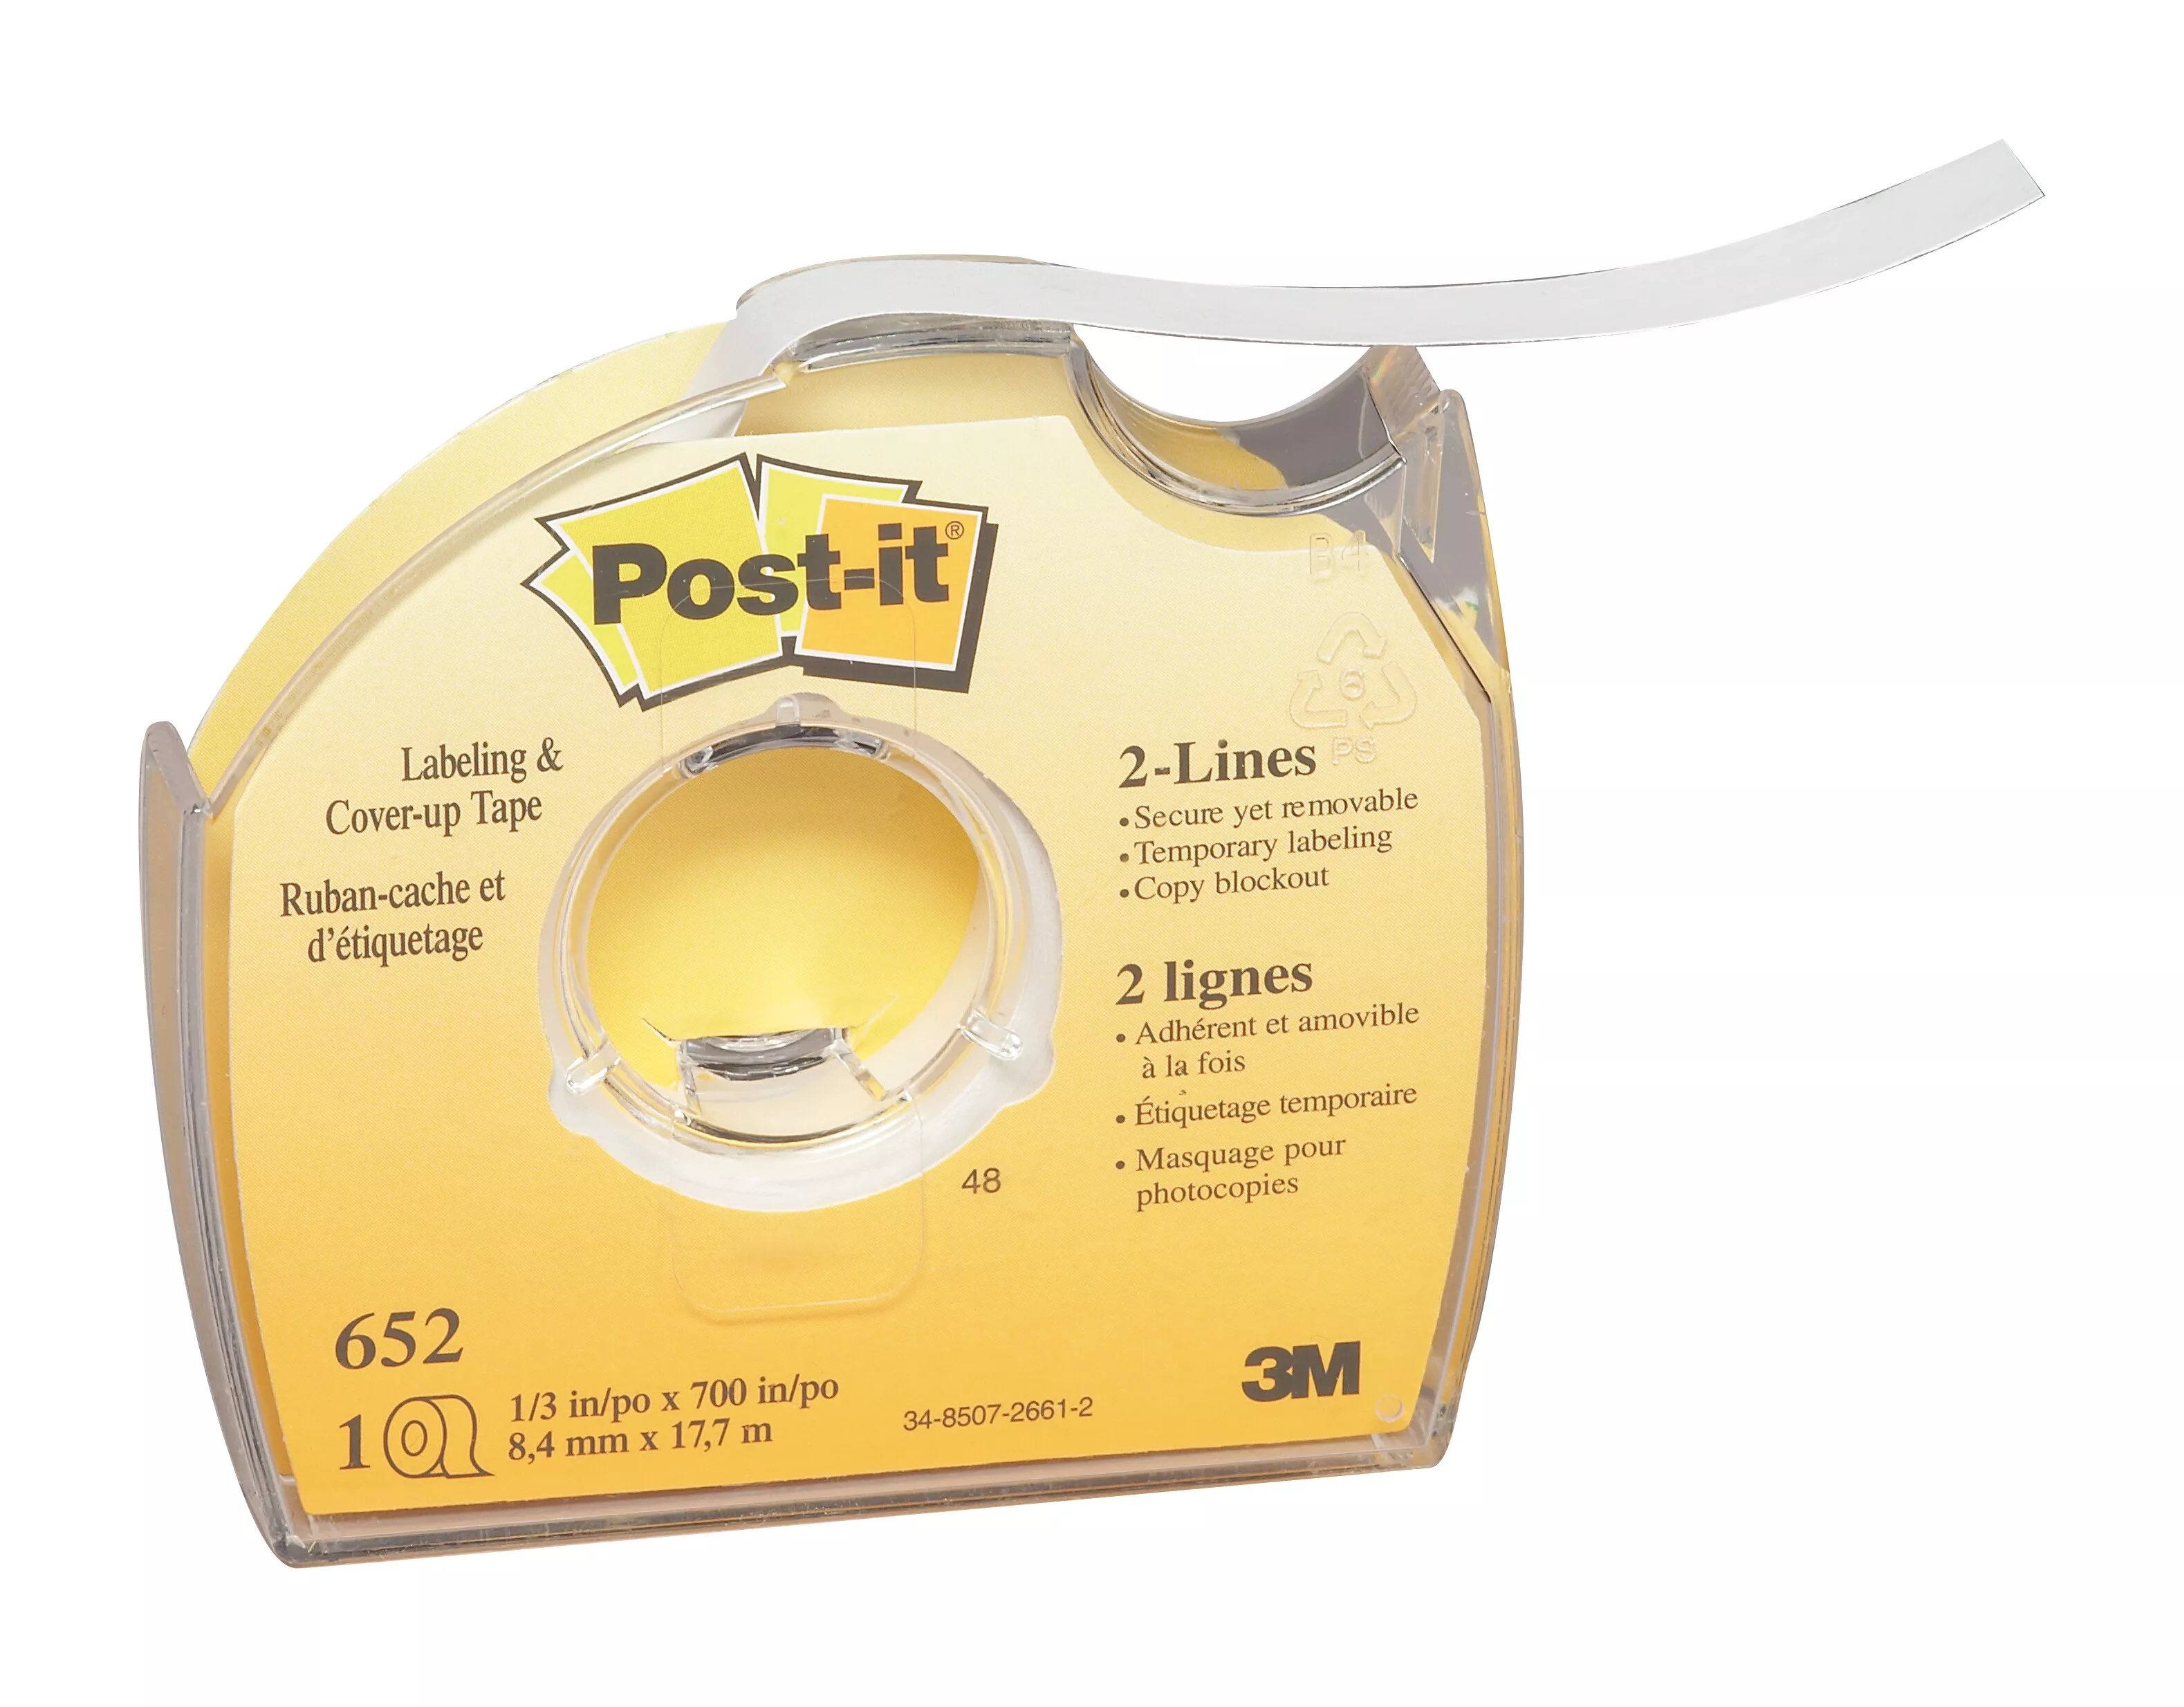 SKU 7000002171 | Post-it® Labeling and Cover-Up Tape 652